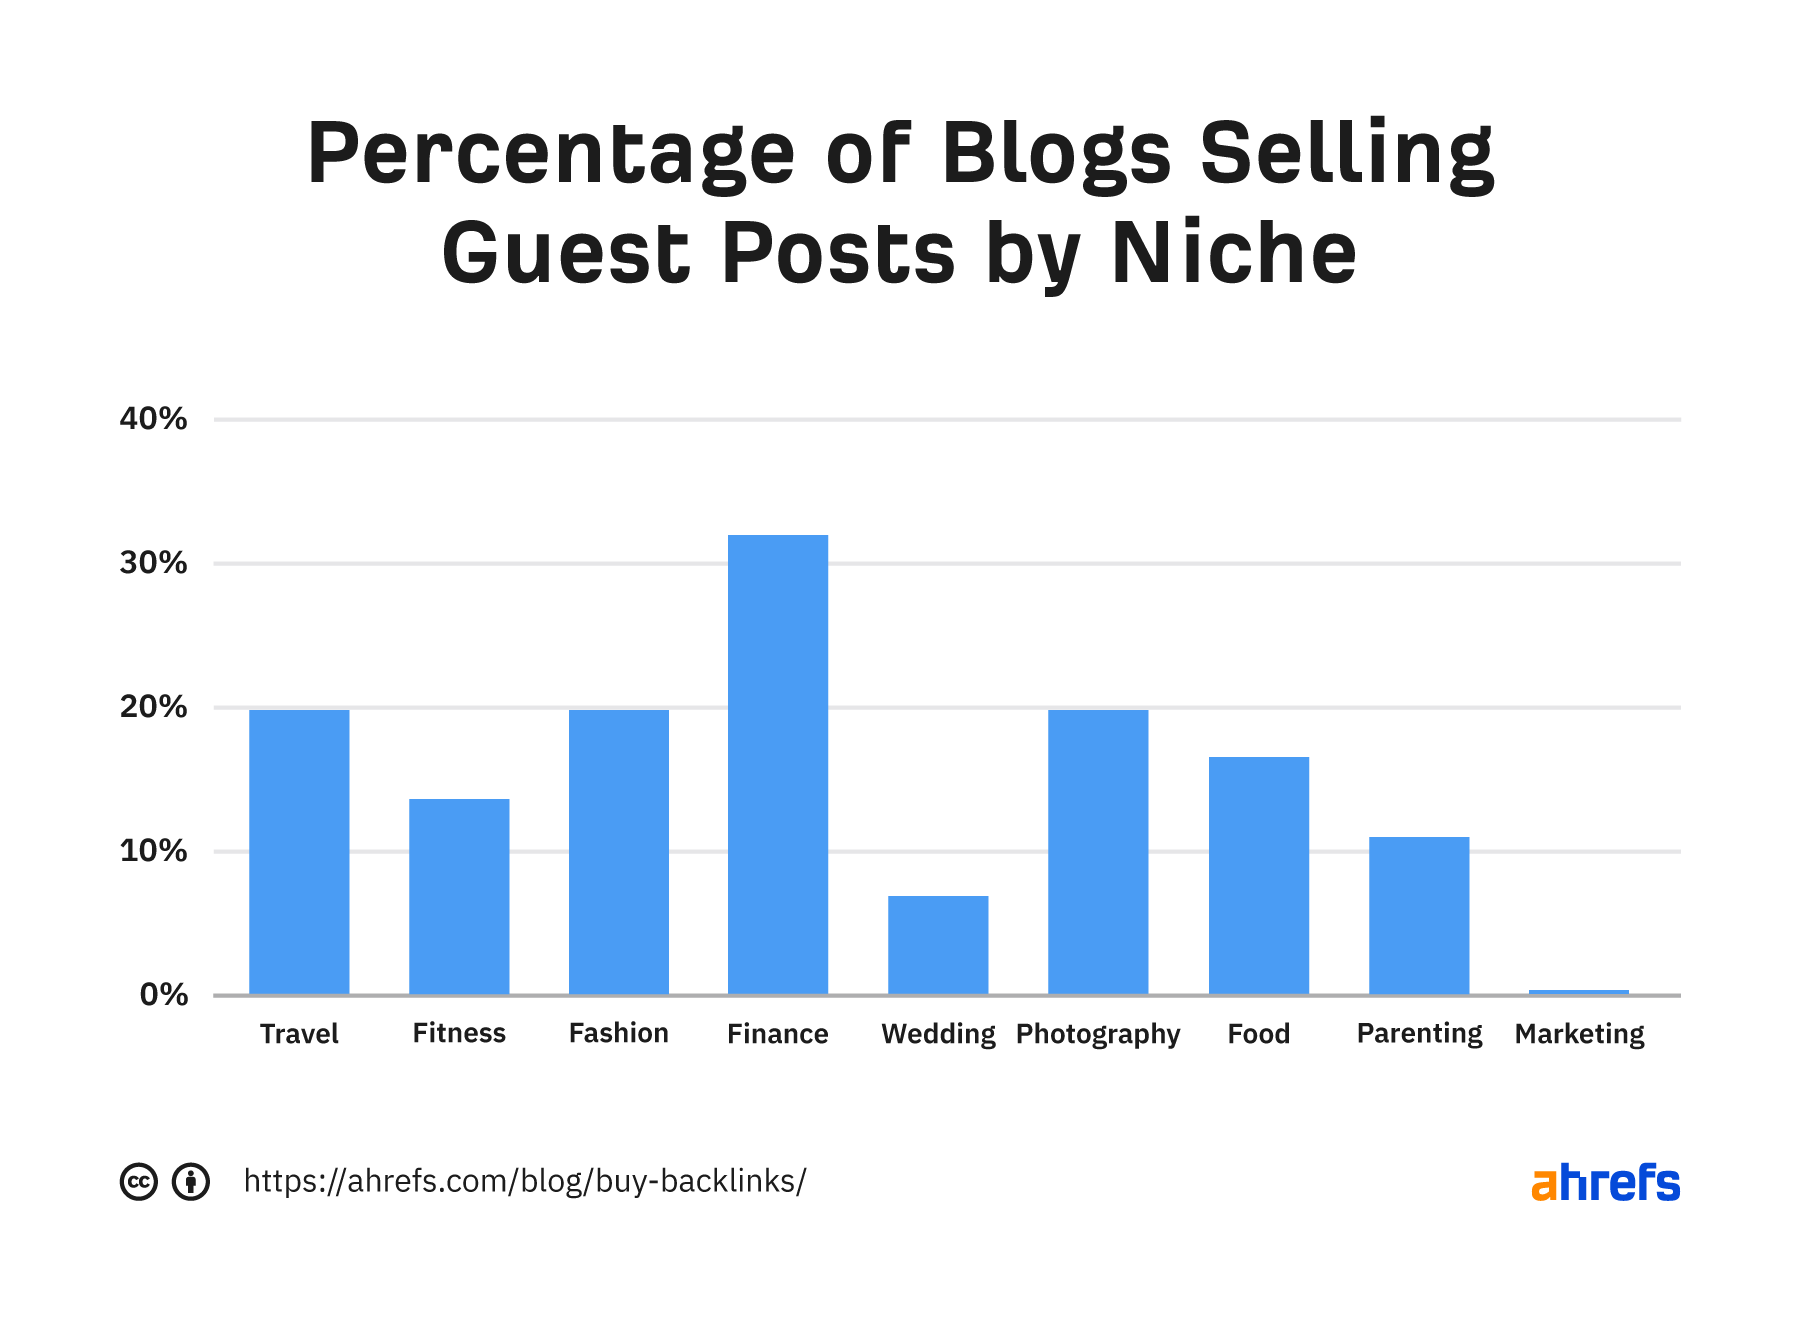 Percentage of blogs selling guest posts by niche